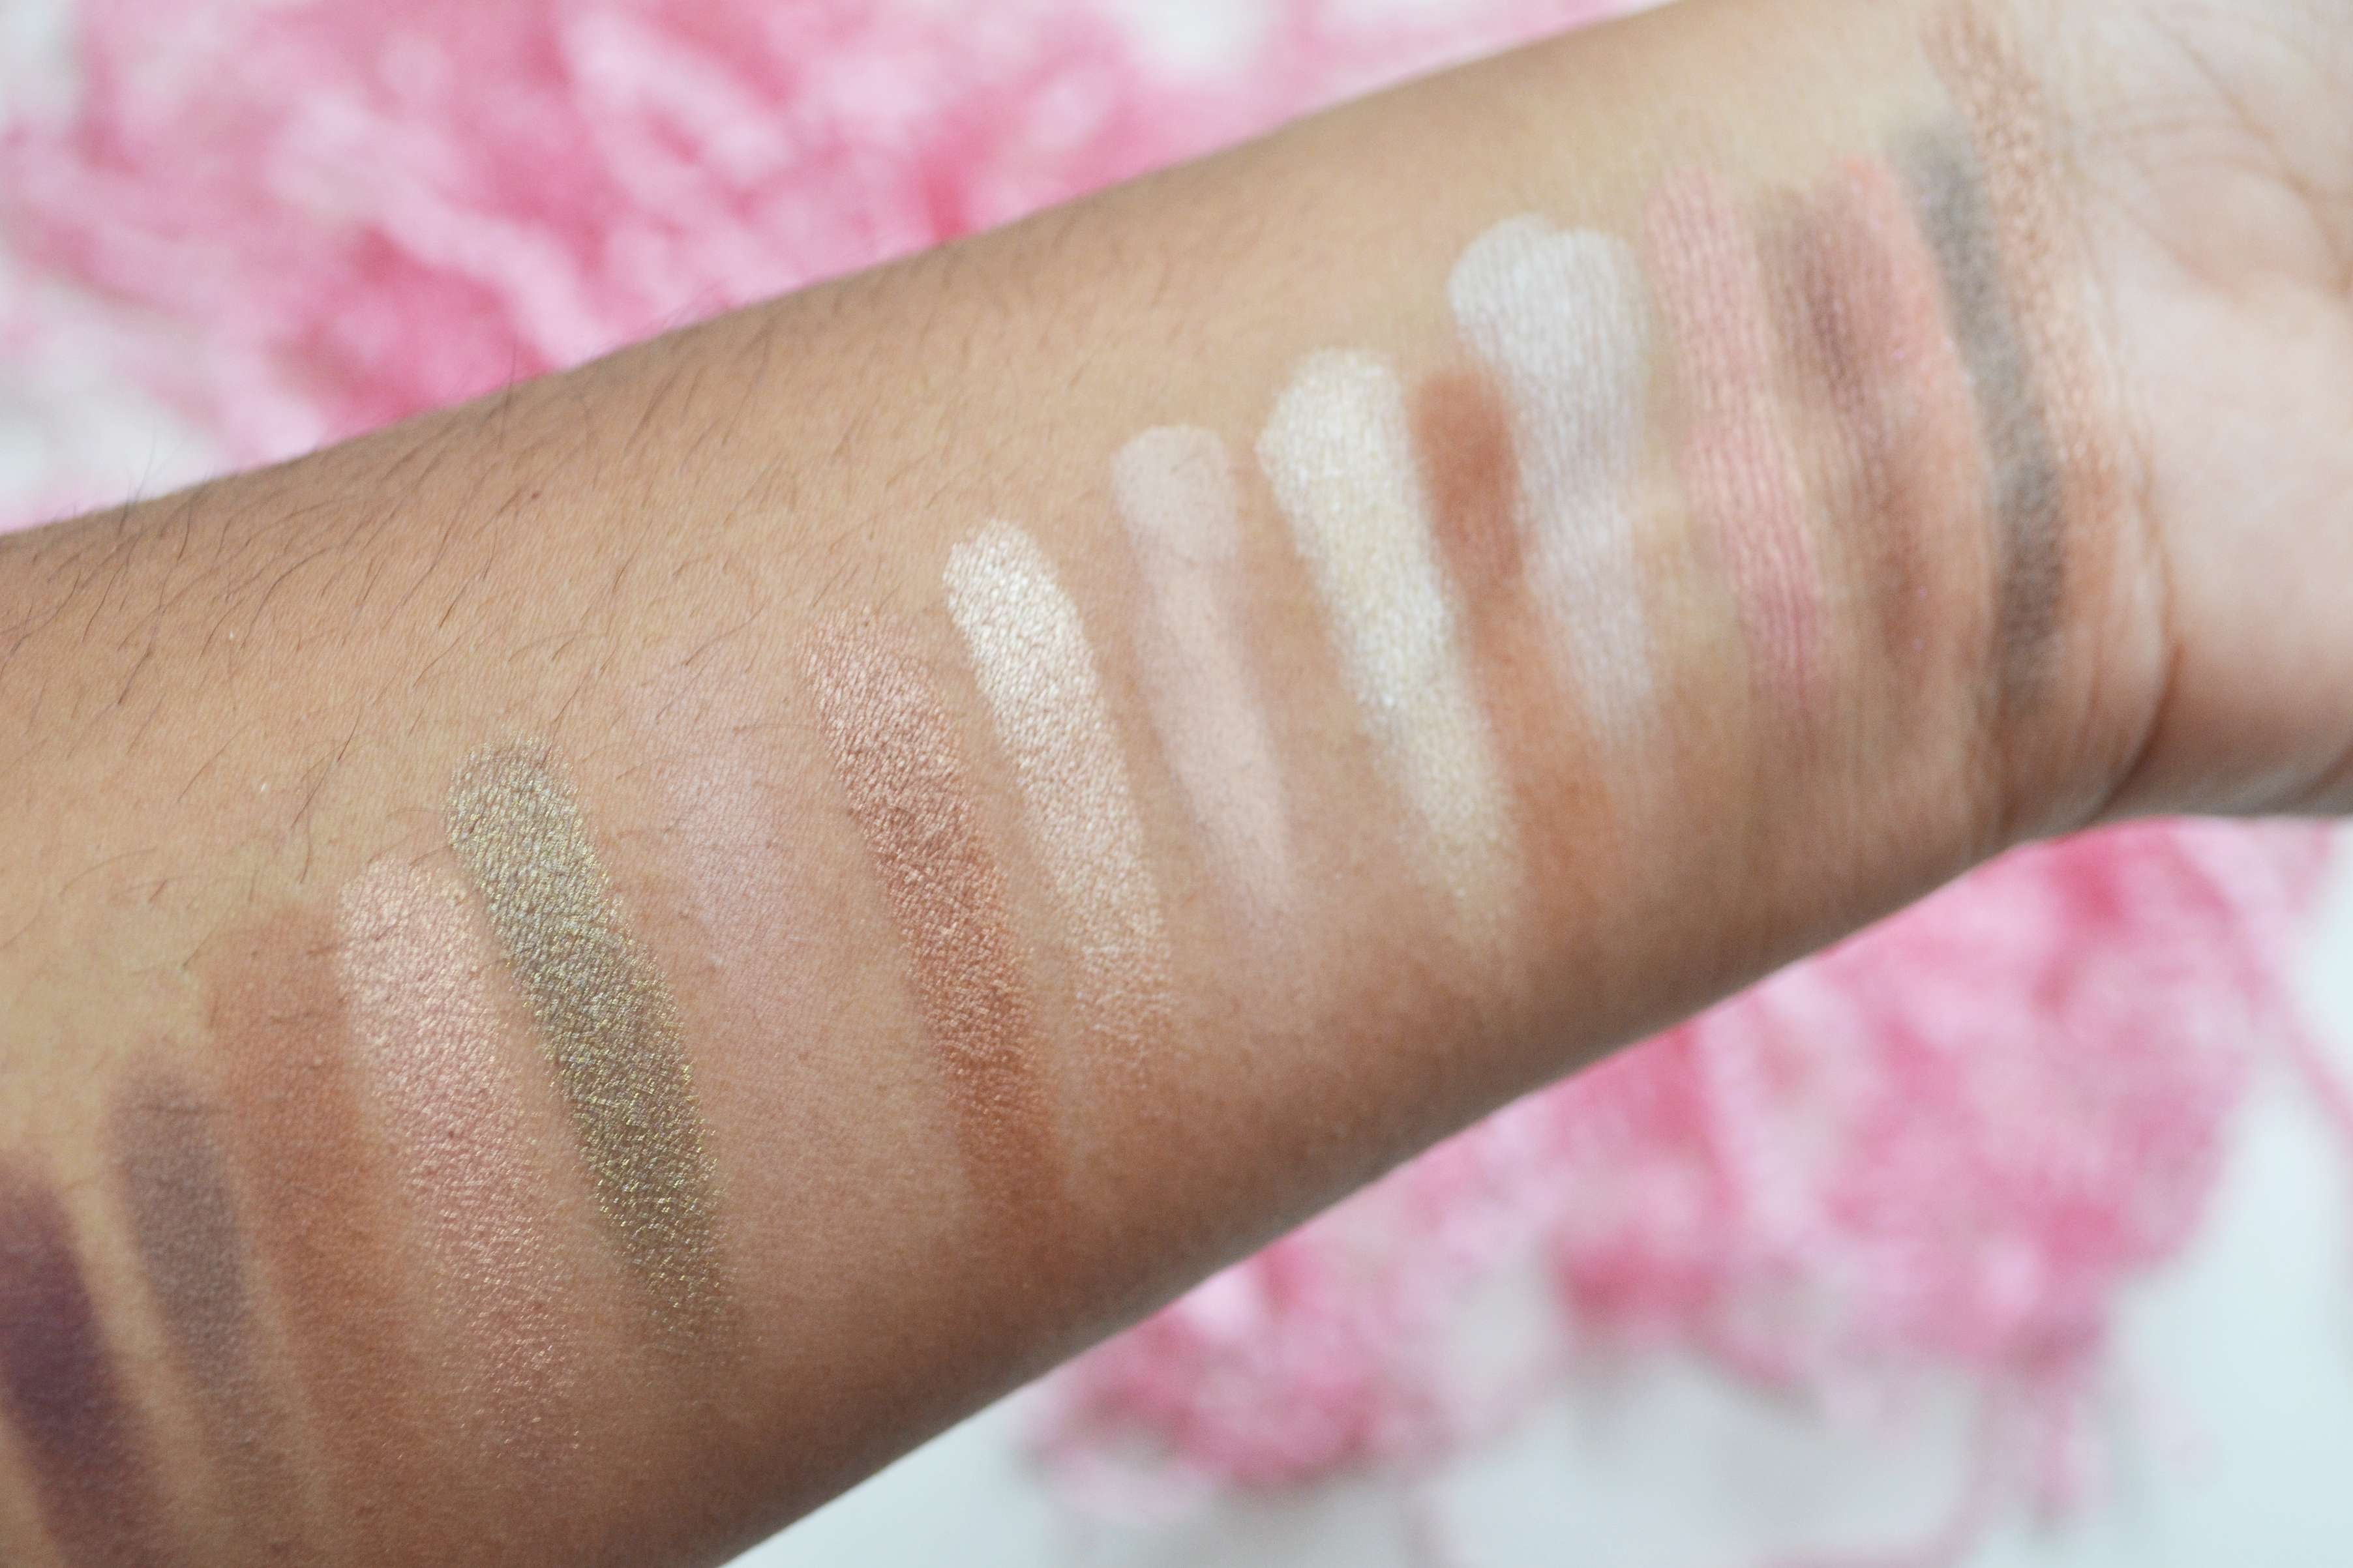 Too Faced Sweet Peach Palette swatches - tan skin